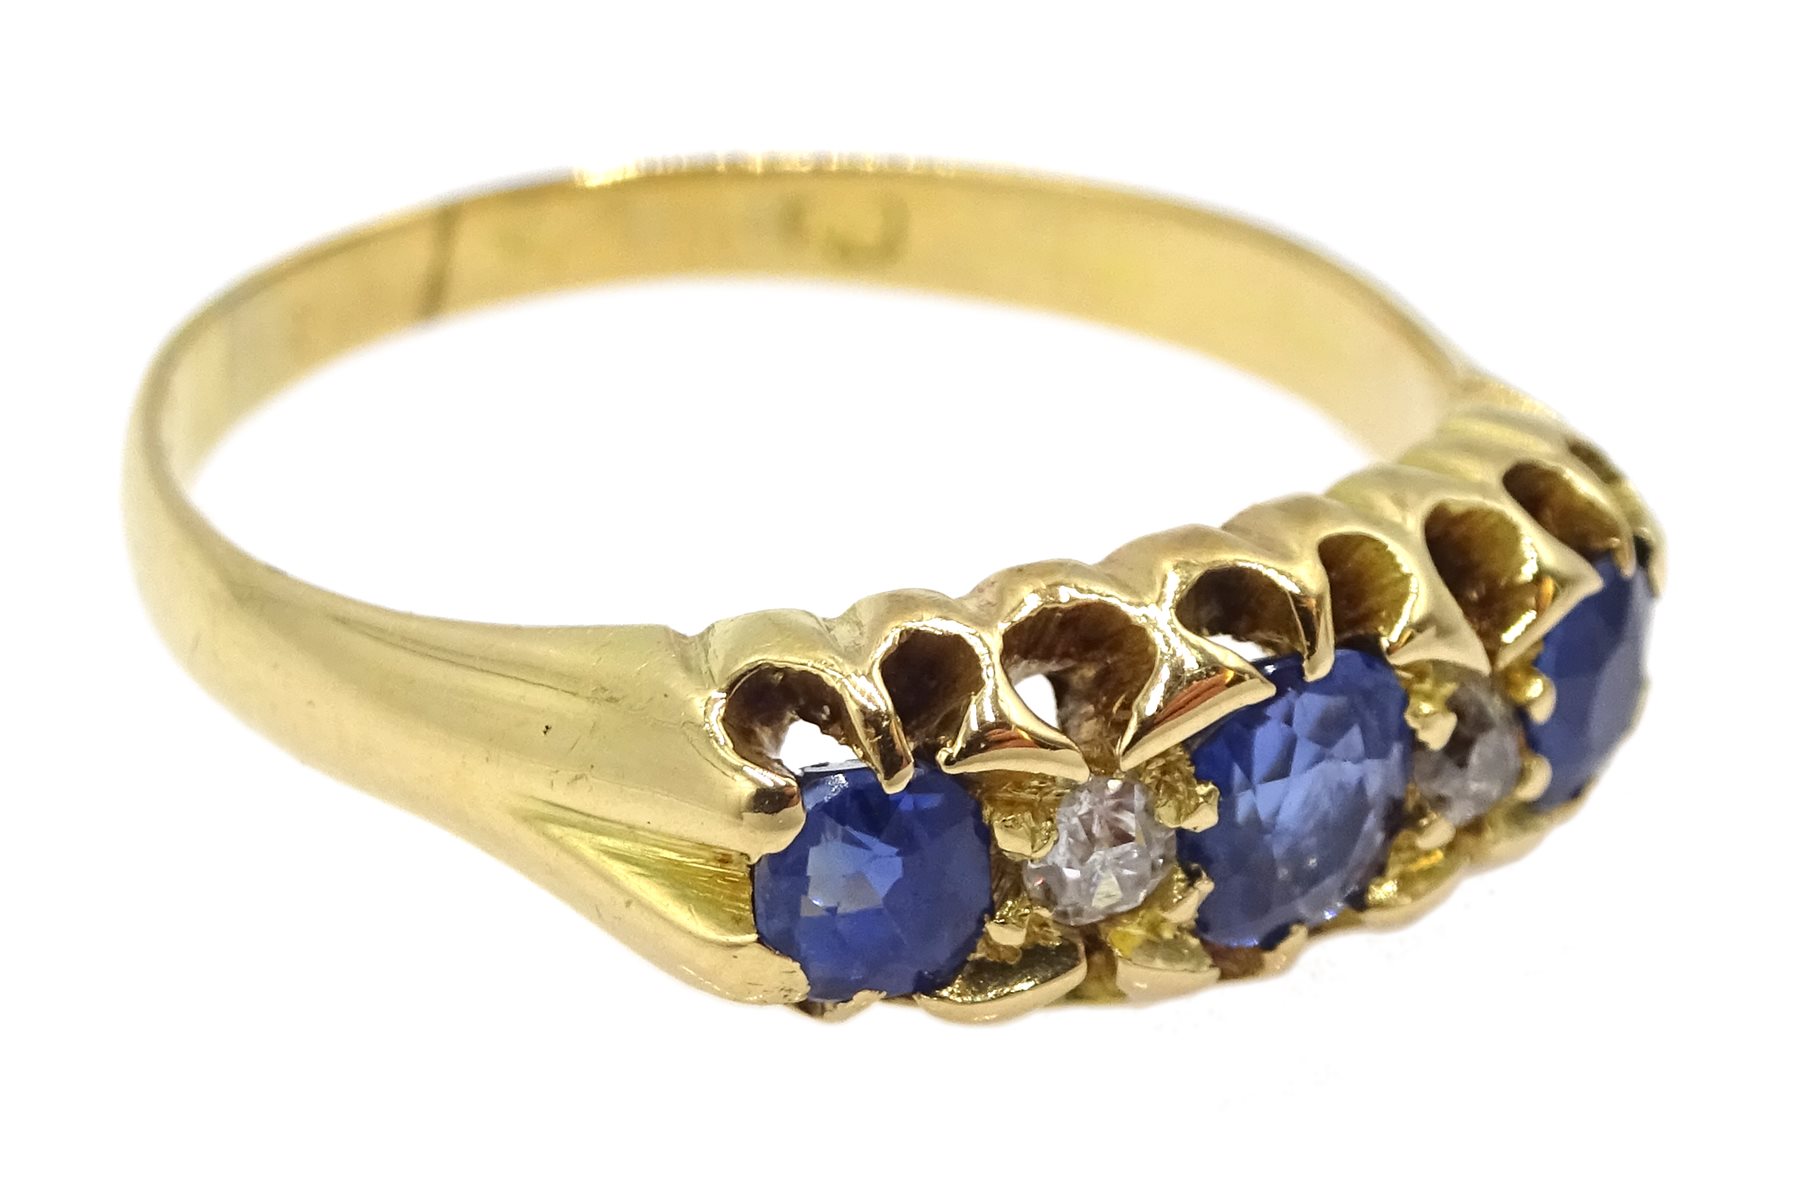 Edwardian 18ct gold five stone sapphire and diamond ring - Image 3 of 4